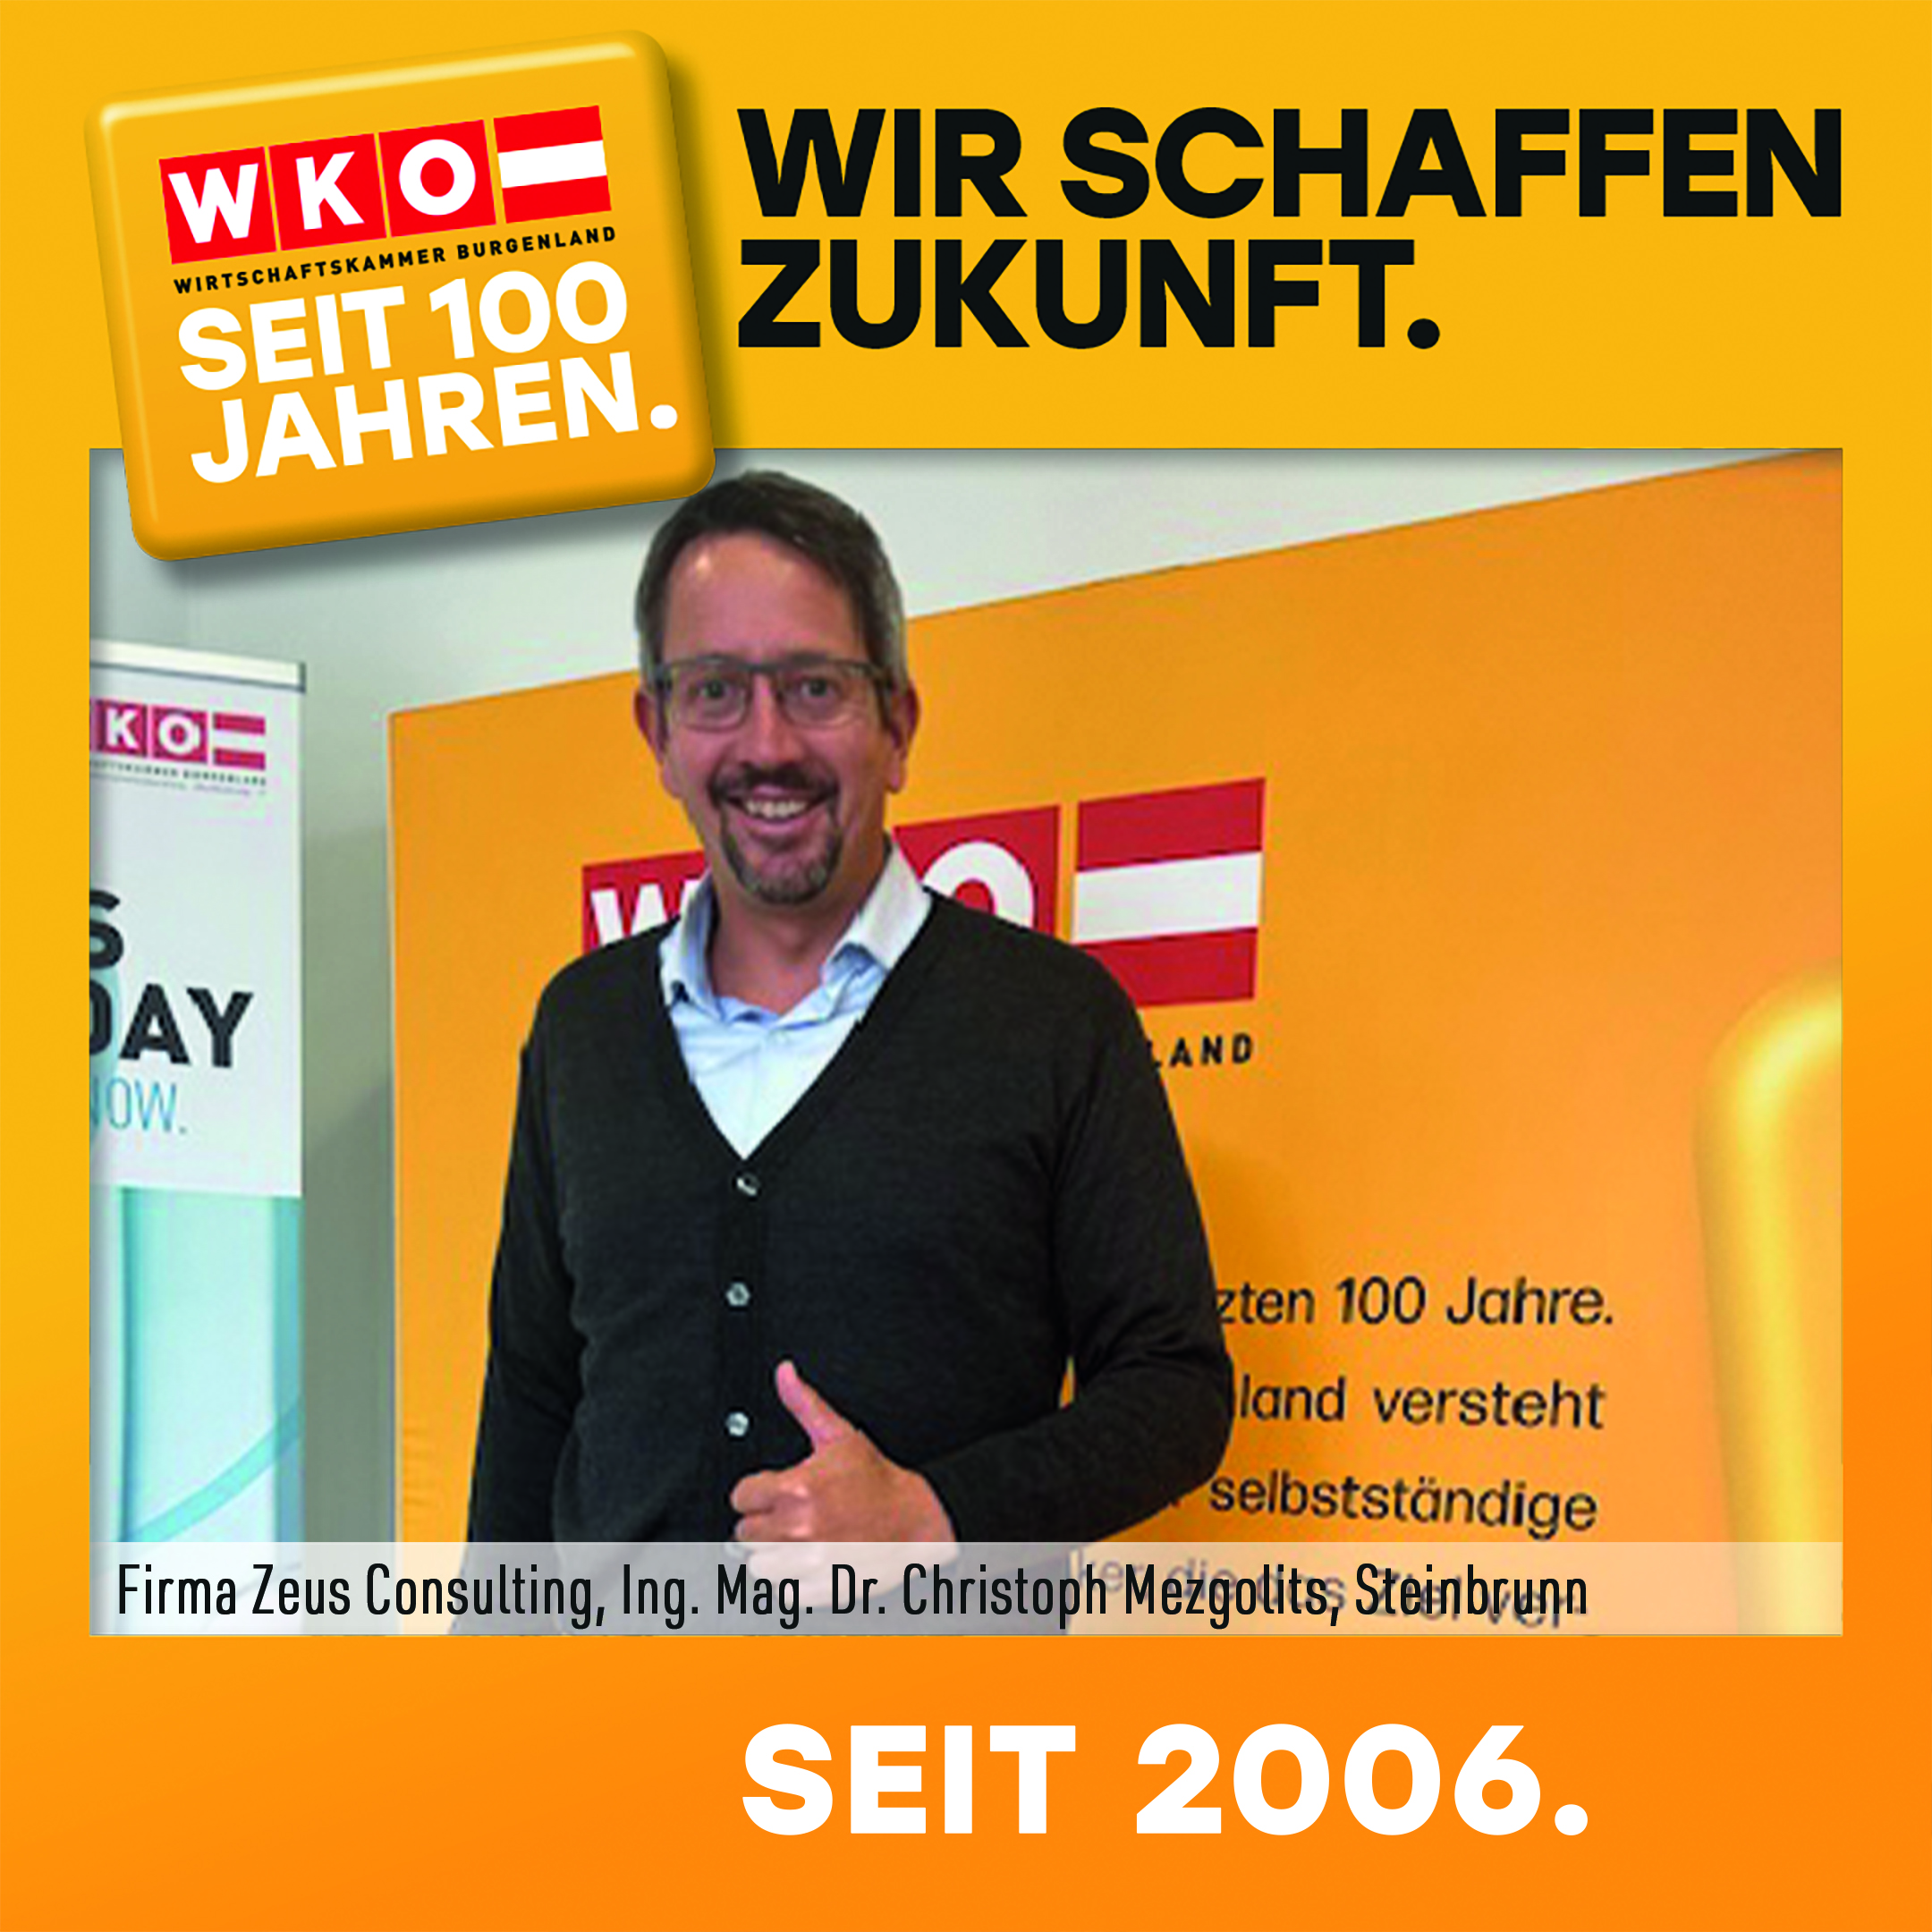 Zeus Consulting, Ing. Mag. Dr. Christoph Mezgolits